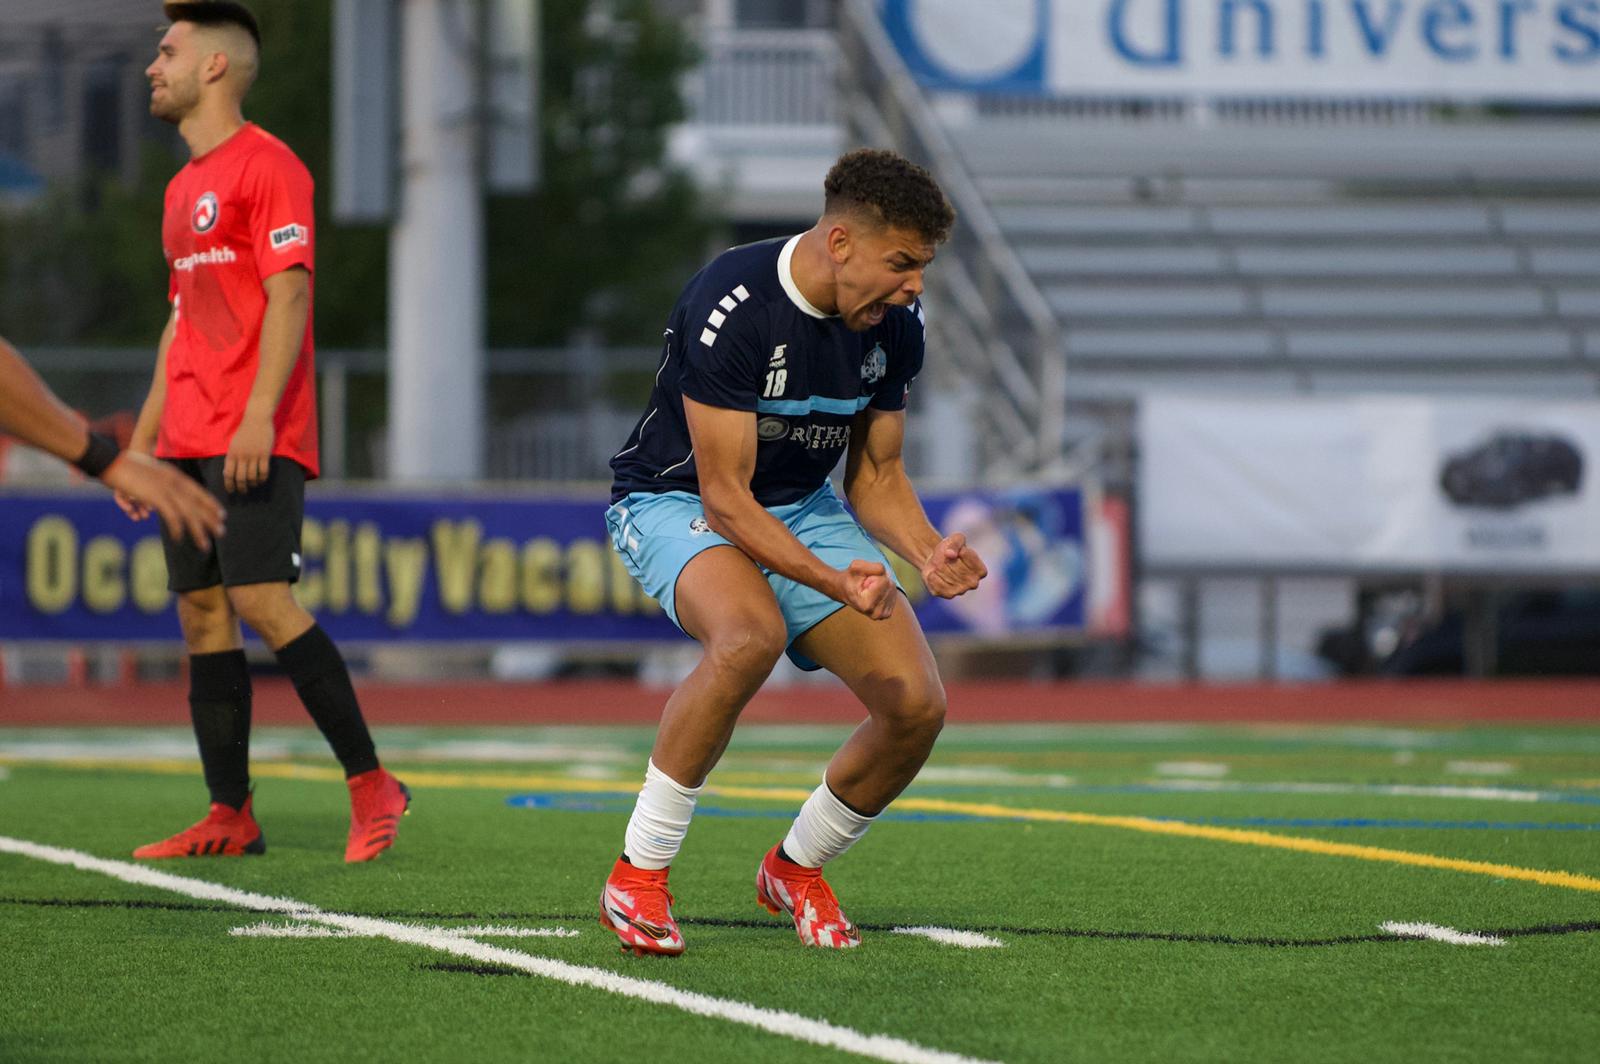 Pablo Marques hat trick gives Nor'easters historic 100th win at Beach House